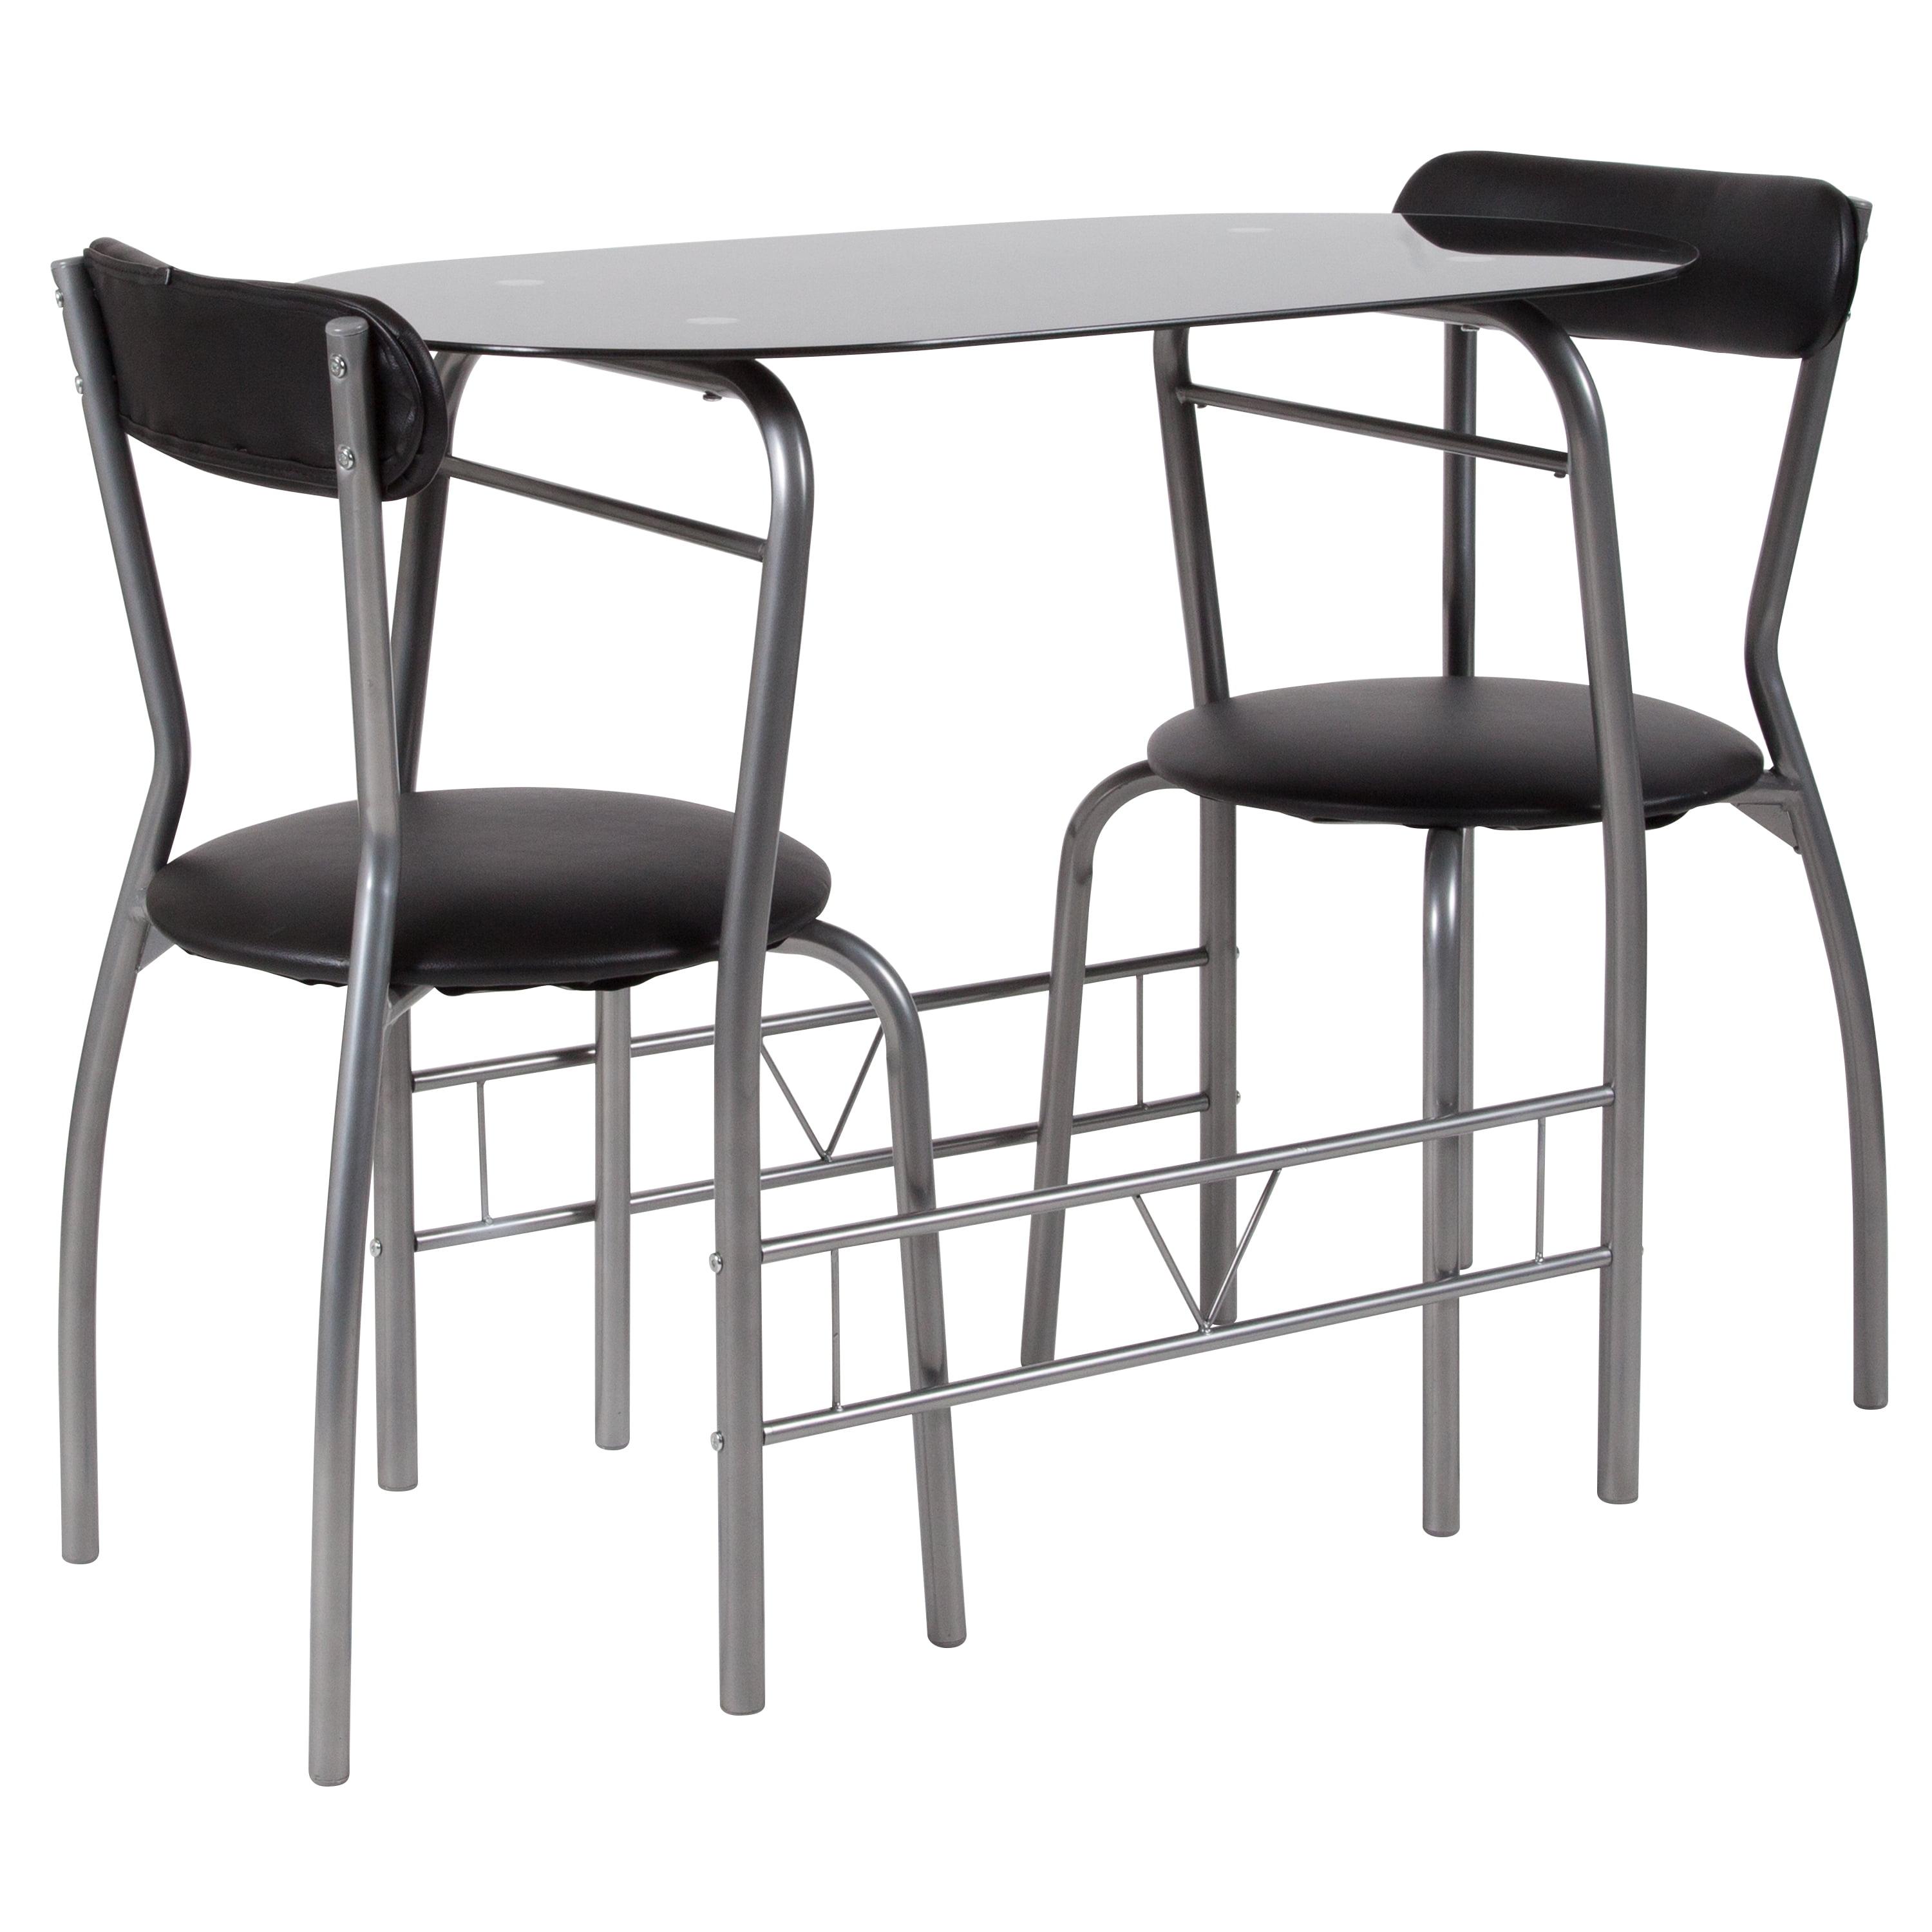 Black Metal and Glass 3-Piece Bistro Set with Vinyl Chairs